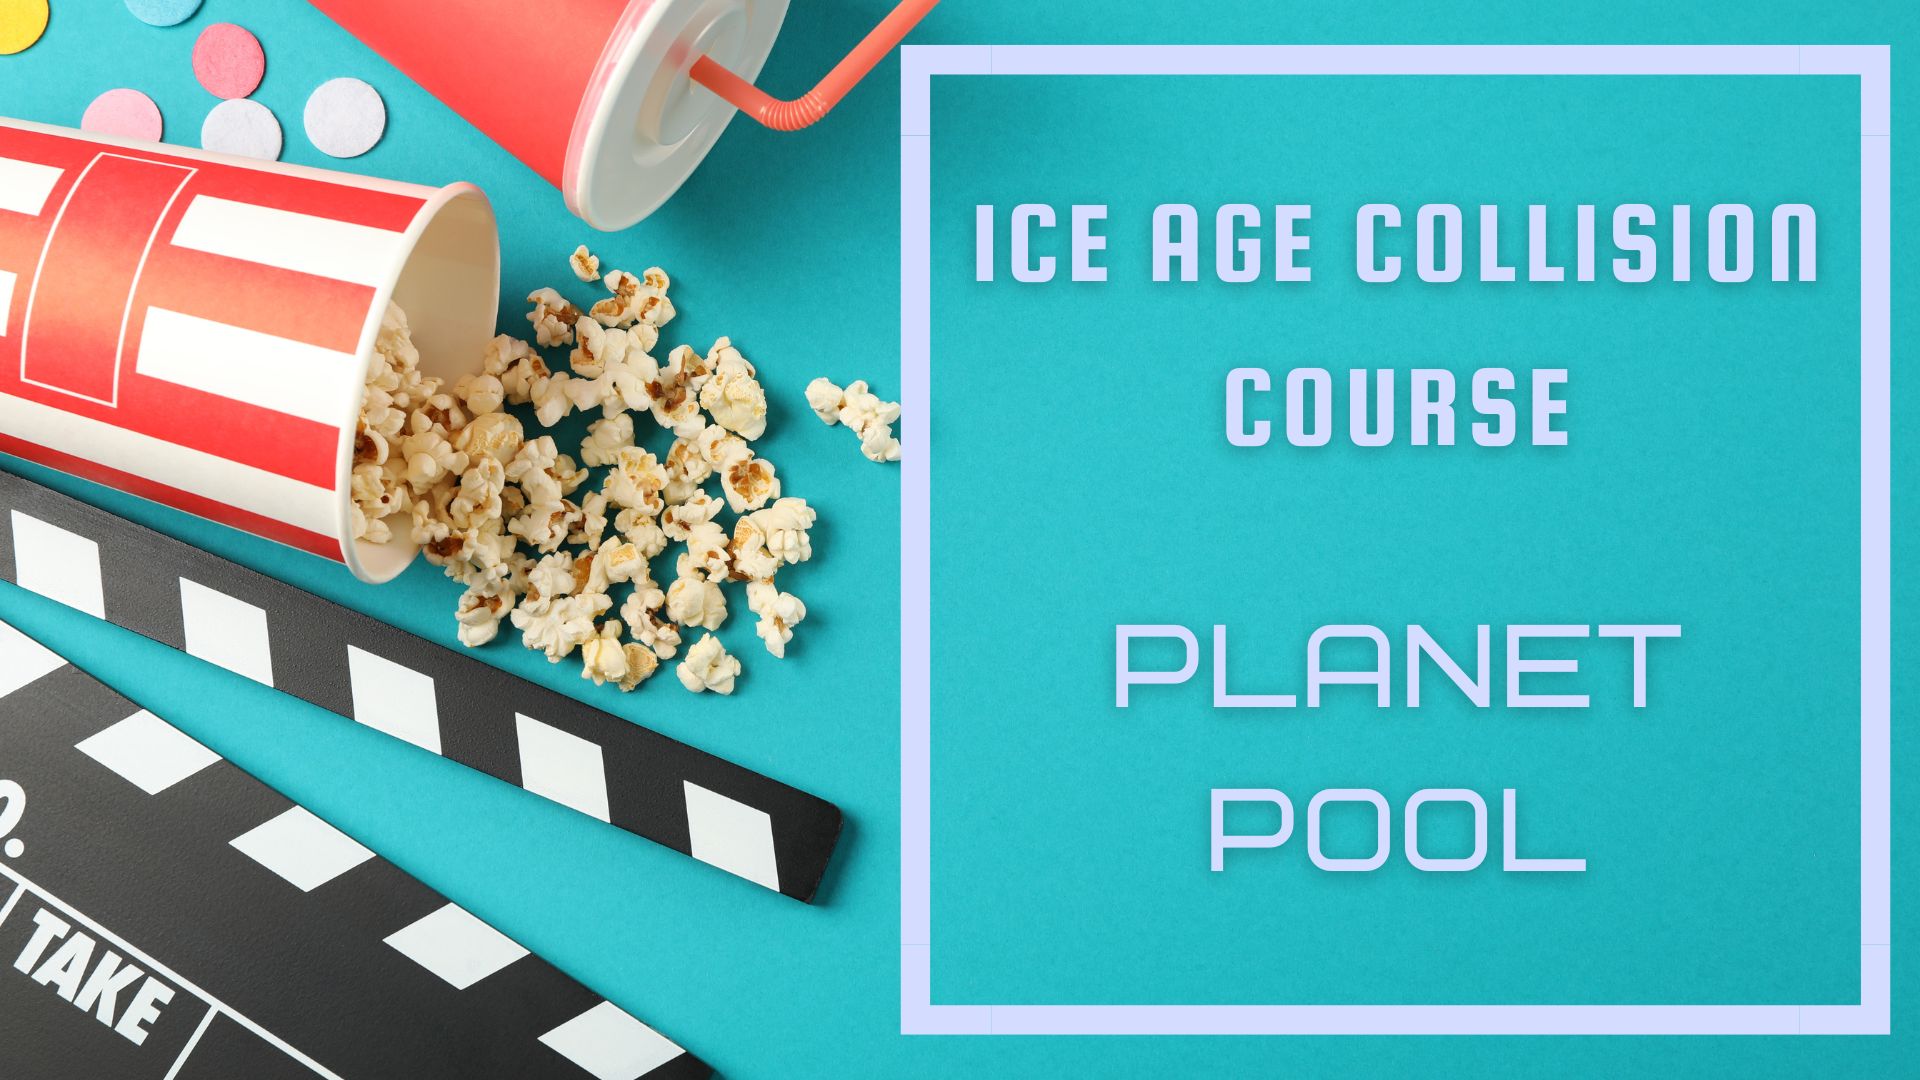 Ice Age Collision Course - Planet Pool